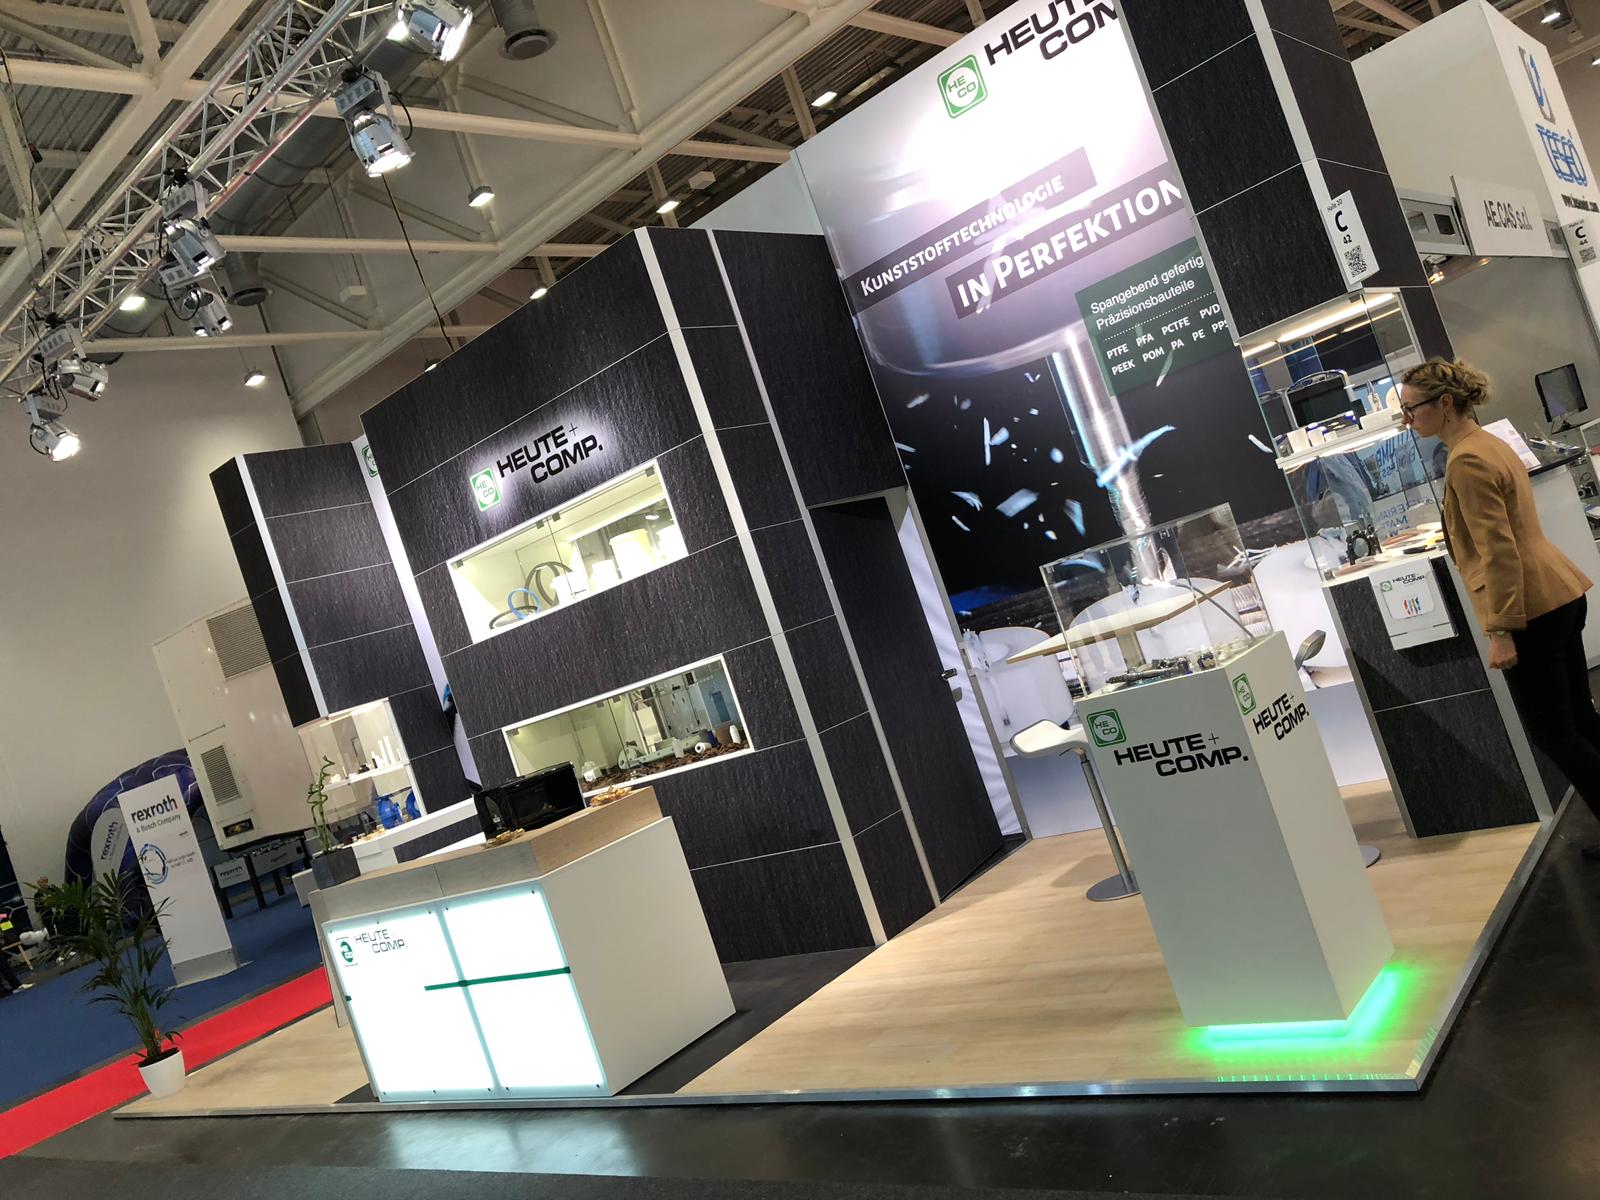 Thank you for your visit at the Hannover Fair 2019